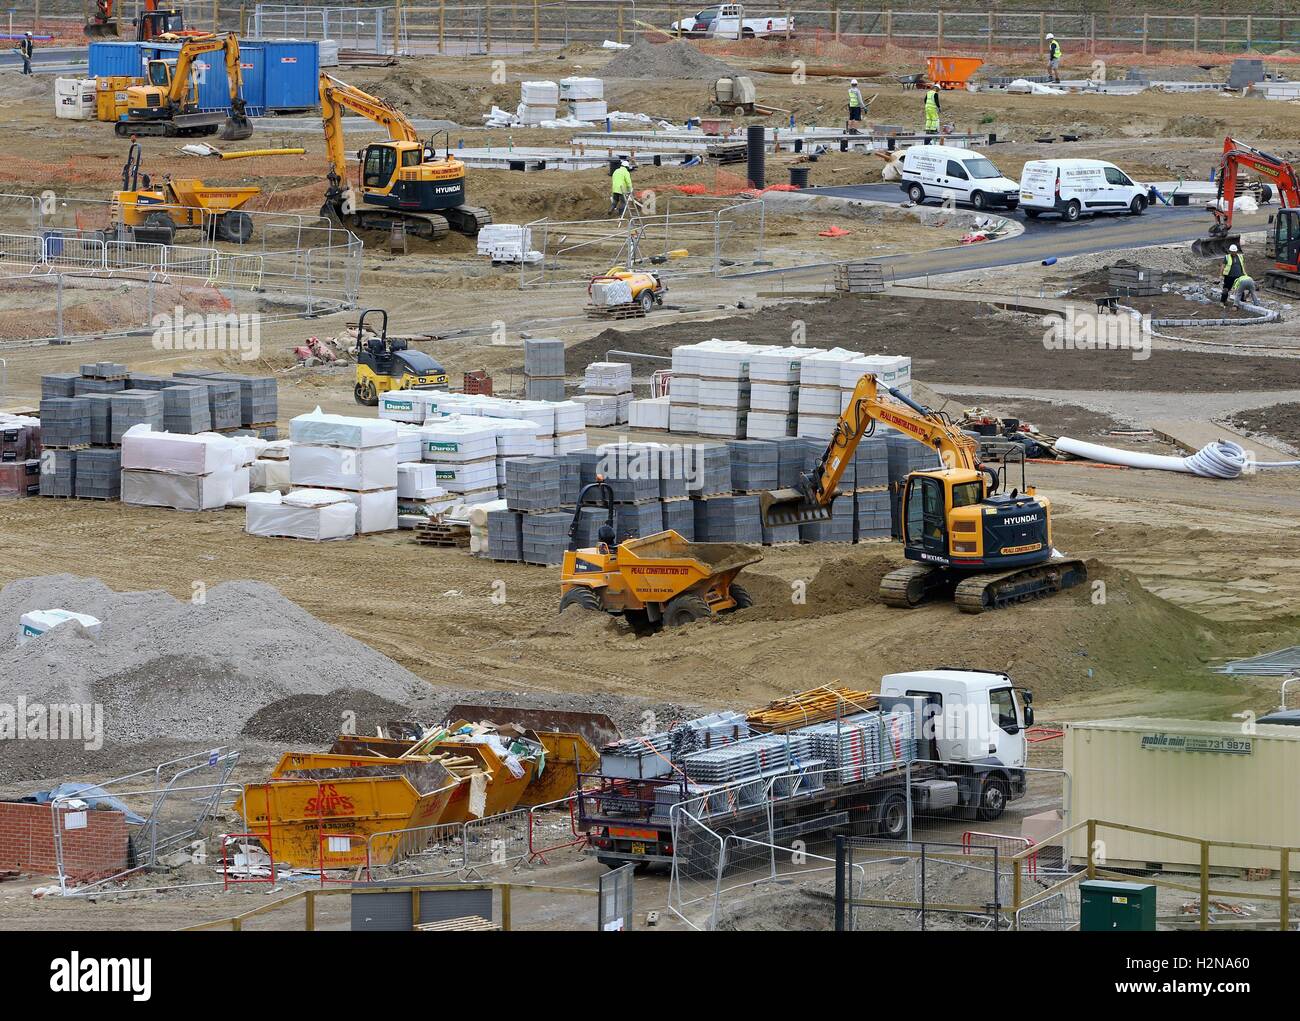 A general view of the construction sites in Ebbsfleet, Kent, where developers are building a new garden city on the Thames Estuary, to help deal with Britain's housing shortage. Stock Photo